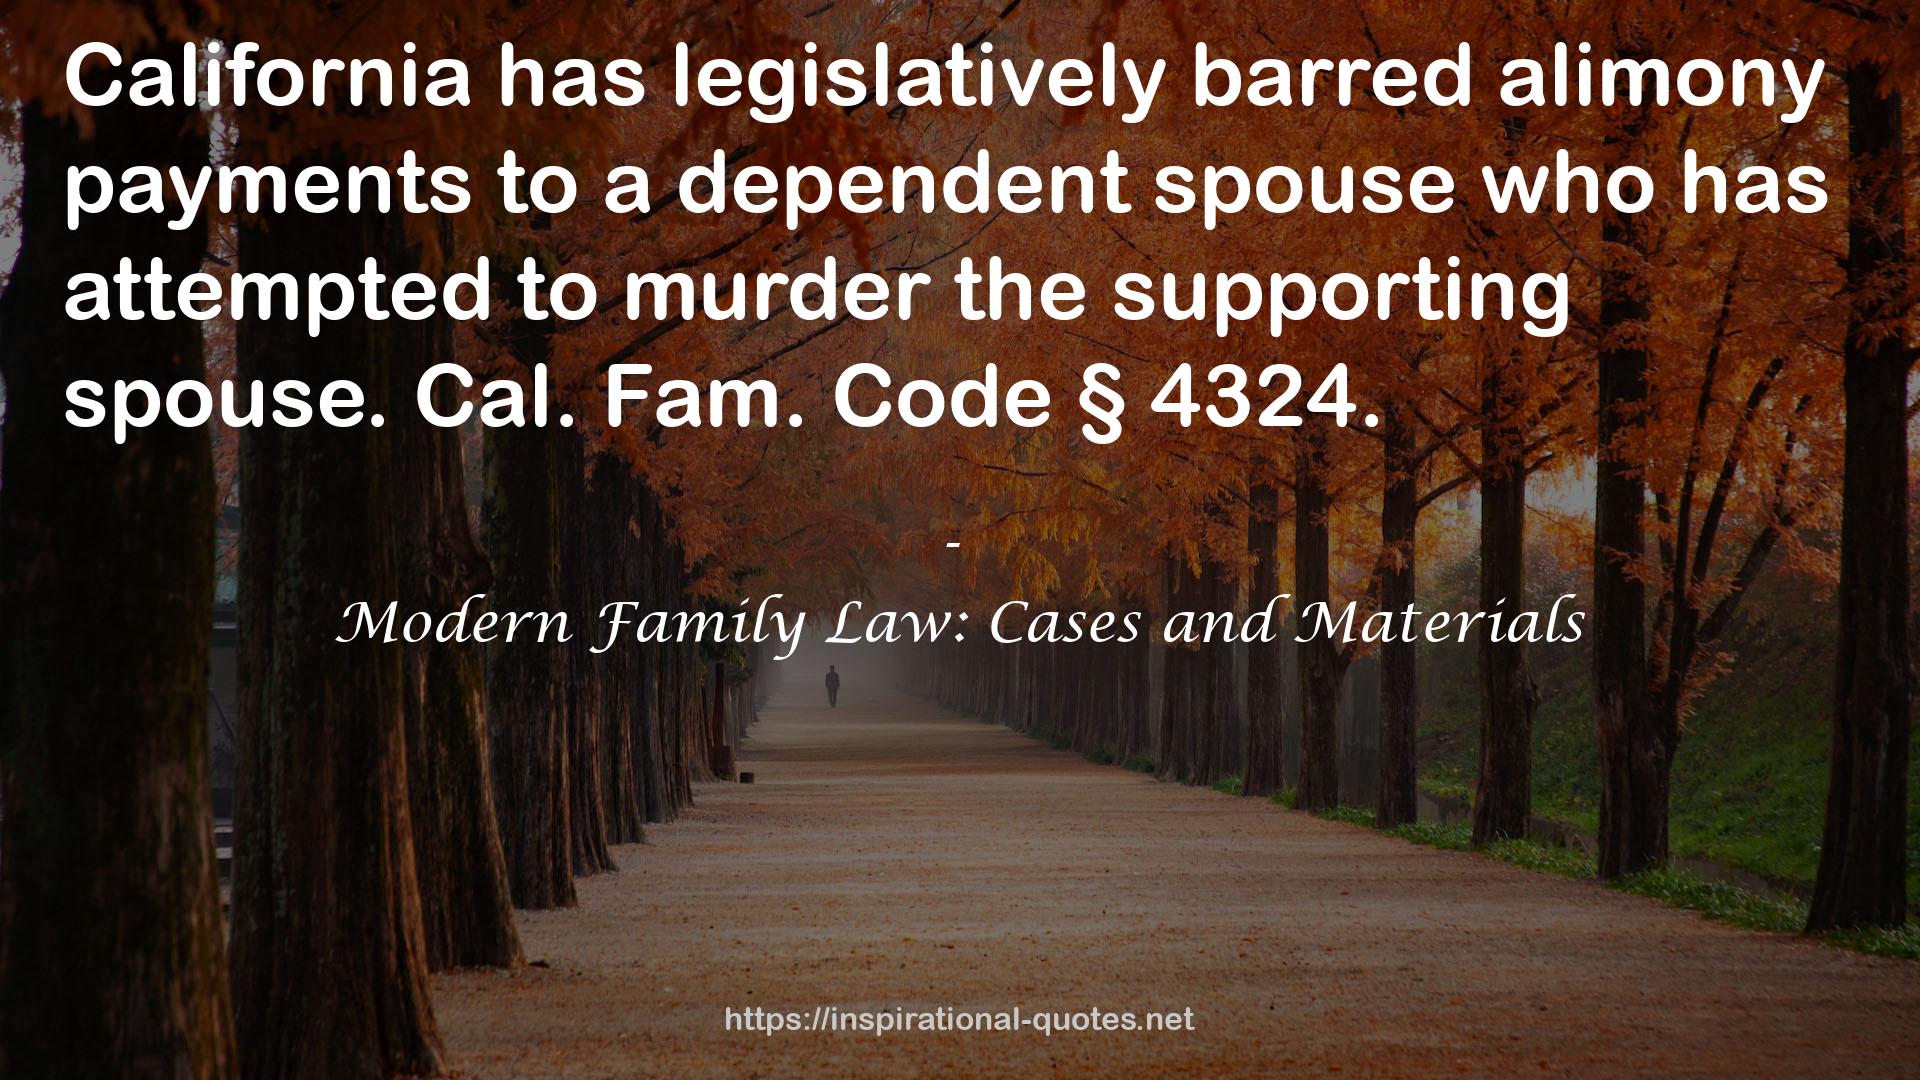 a dependent spouse  QUOTES